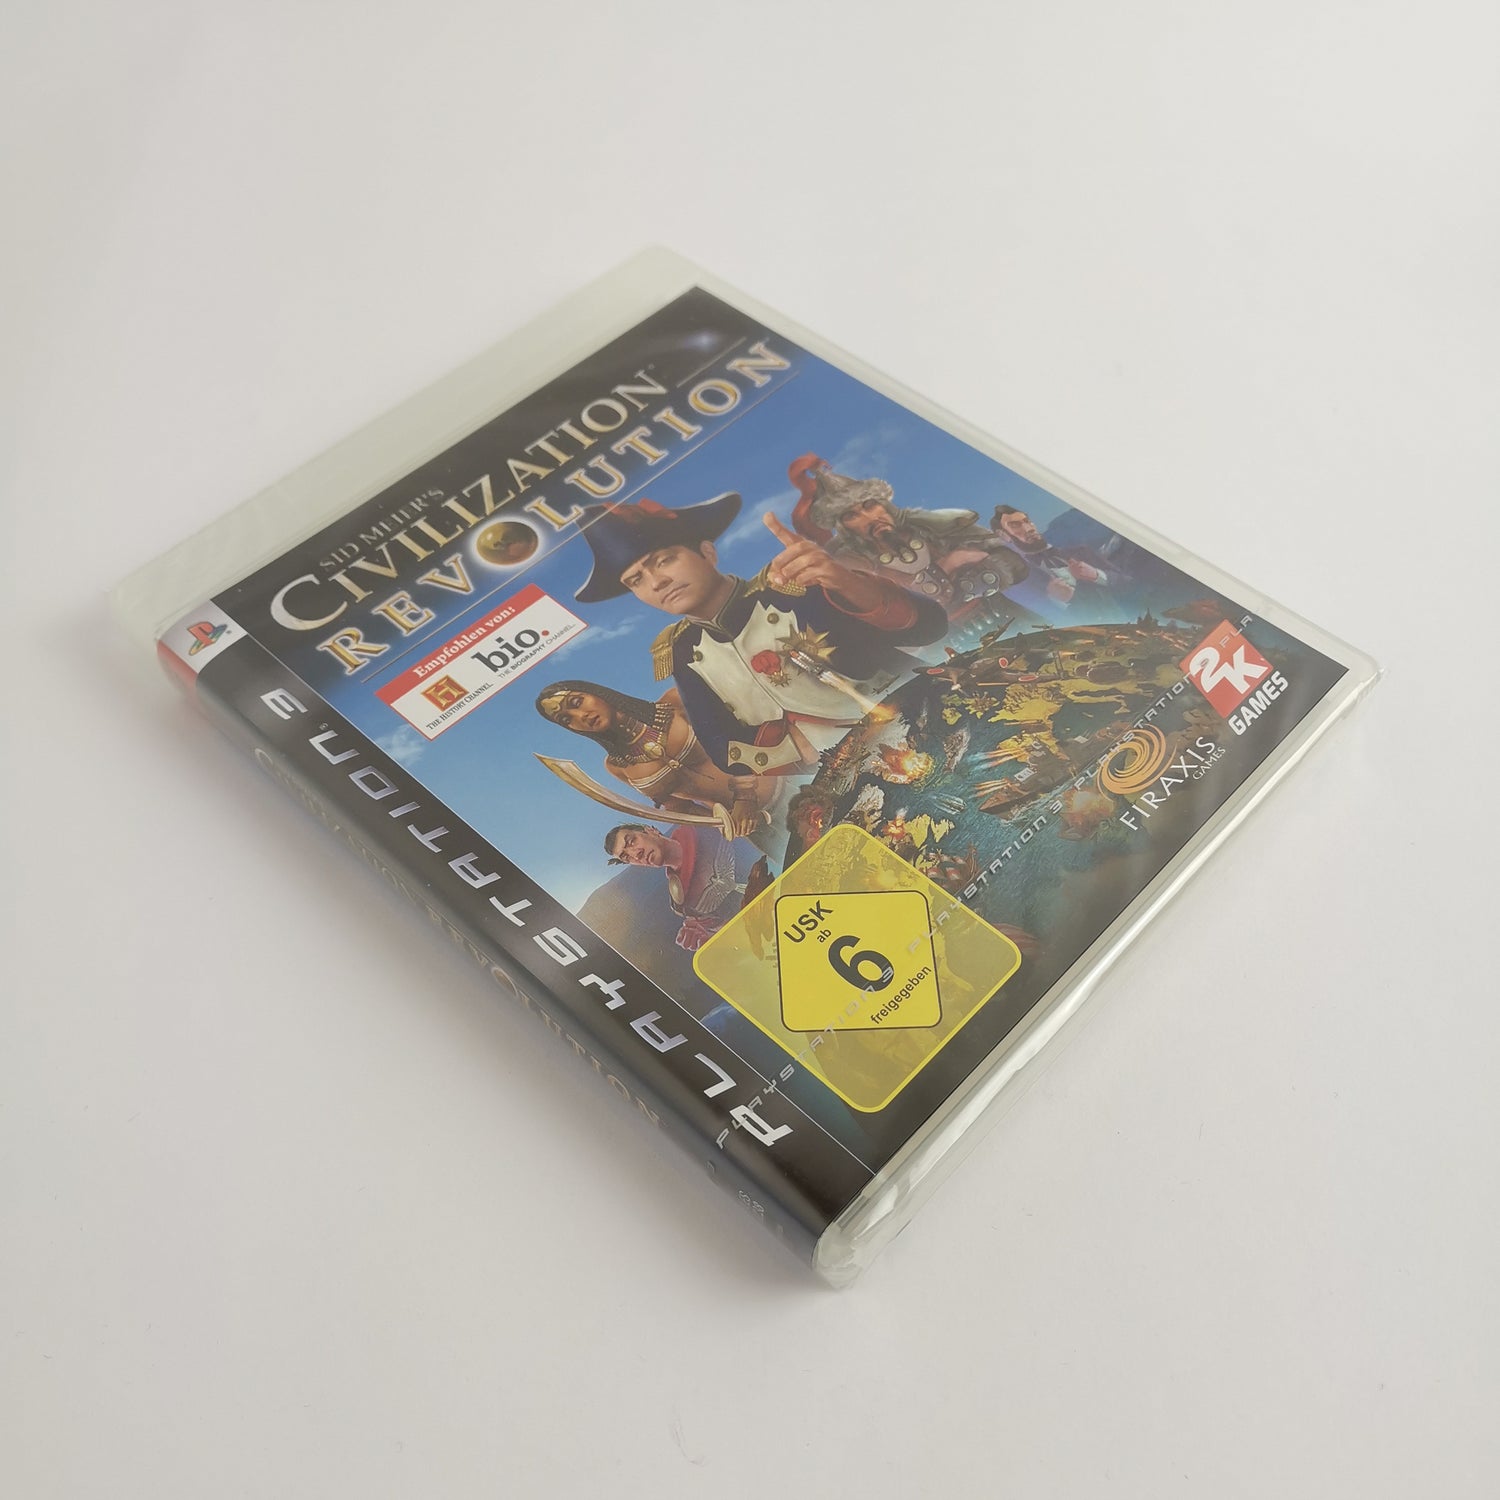 Sony Playstation 3 Game: Sid Meier's Civilization Revolution | PS3 NEW SEALED